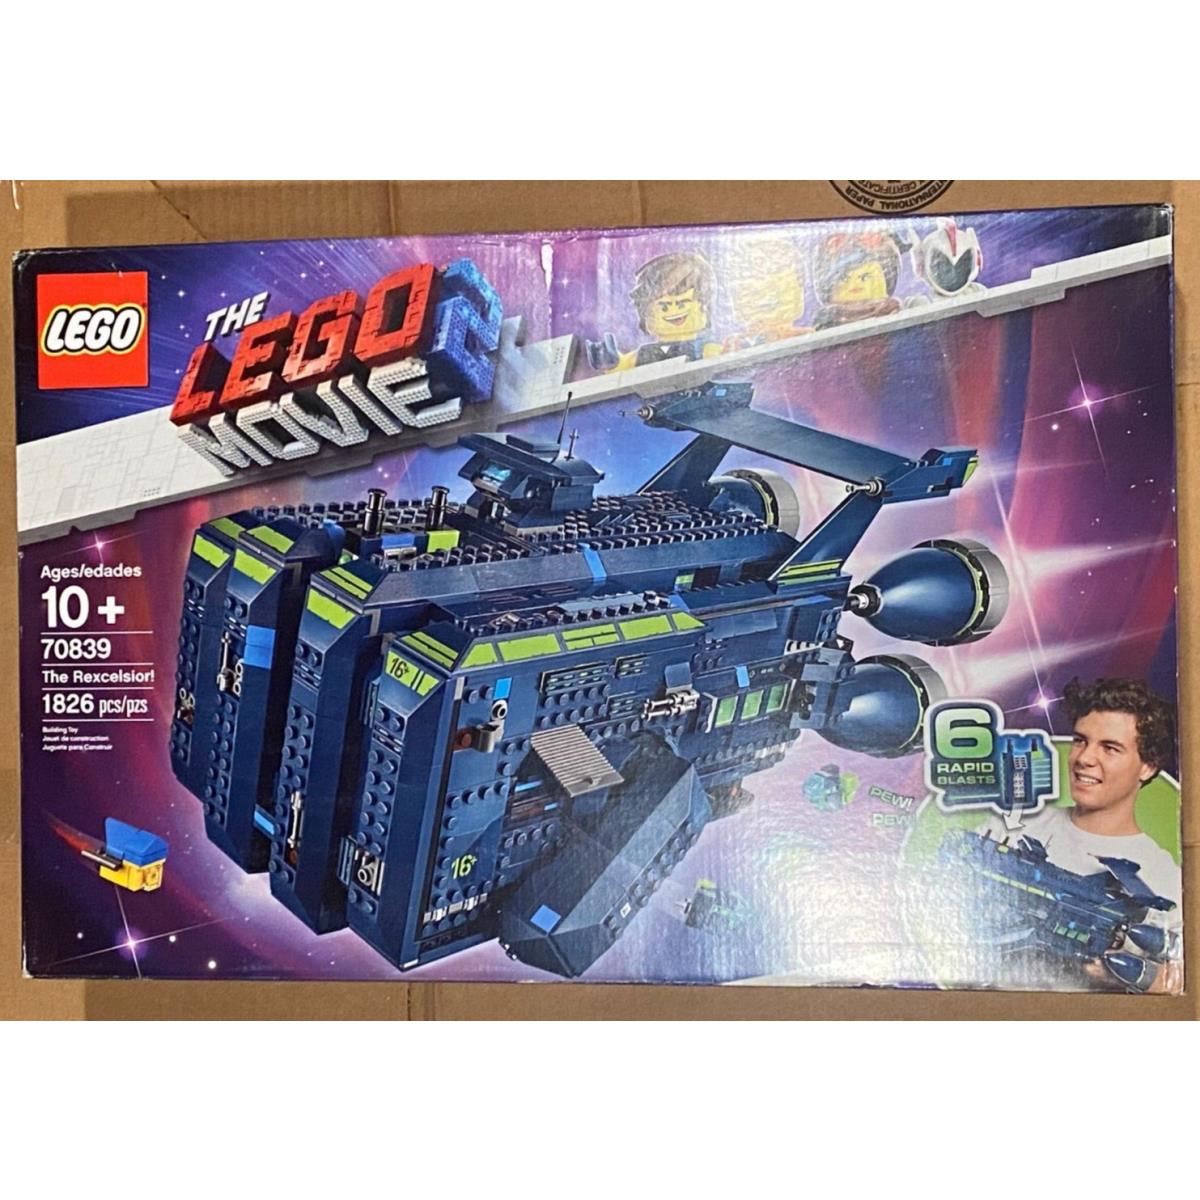 Lego The Lego Movie 2: The Rexcelsior 70839 - Minor Creasing